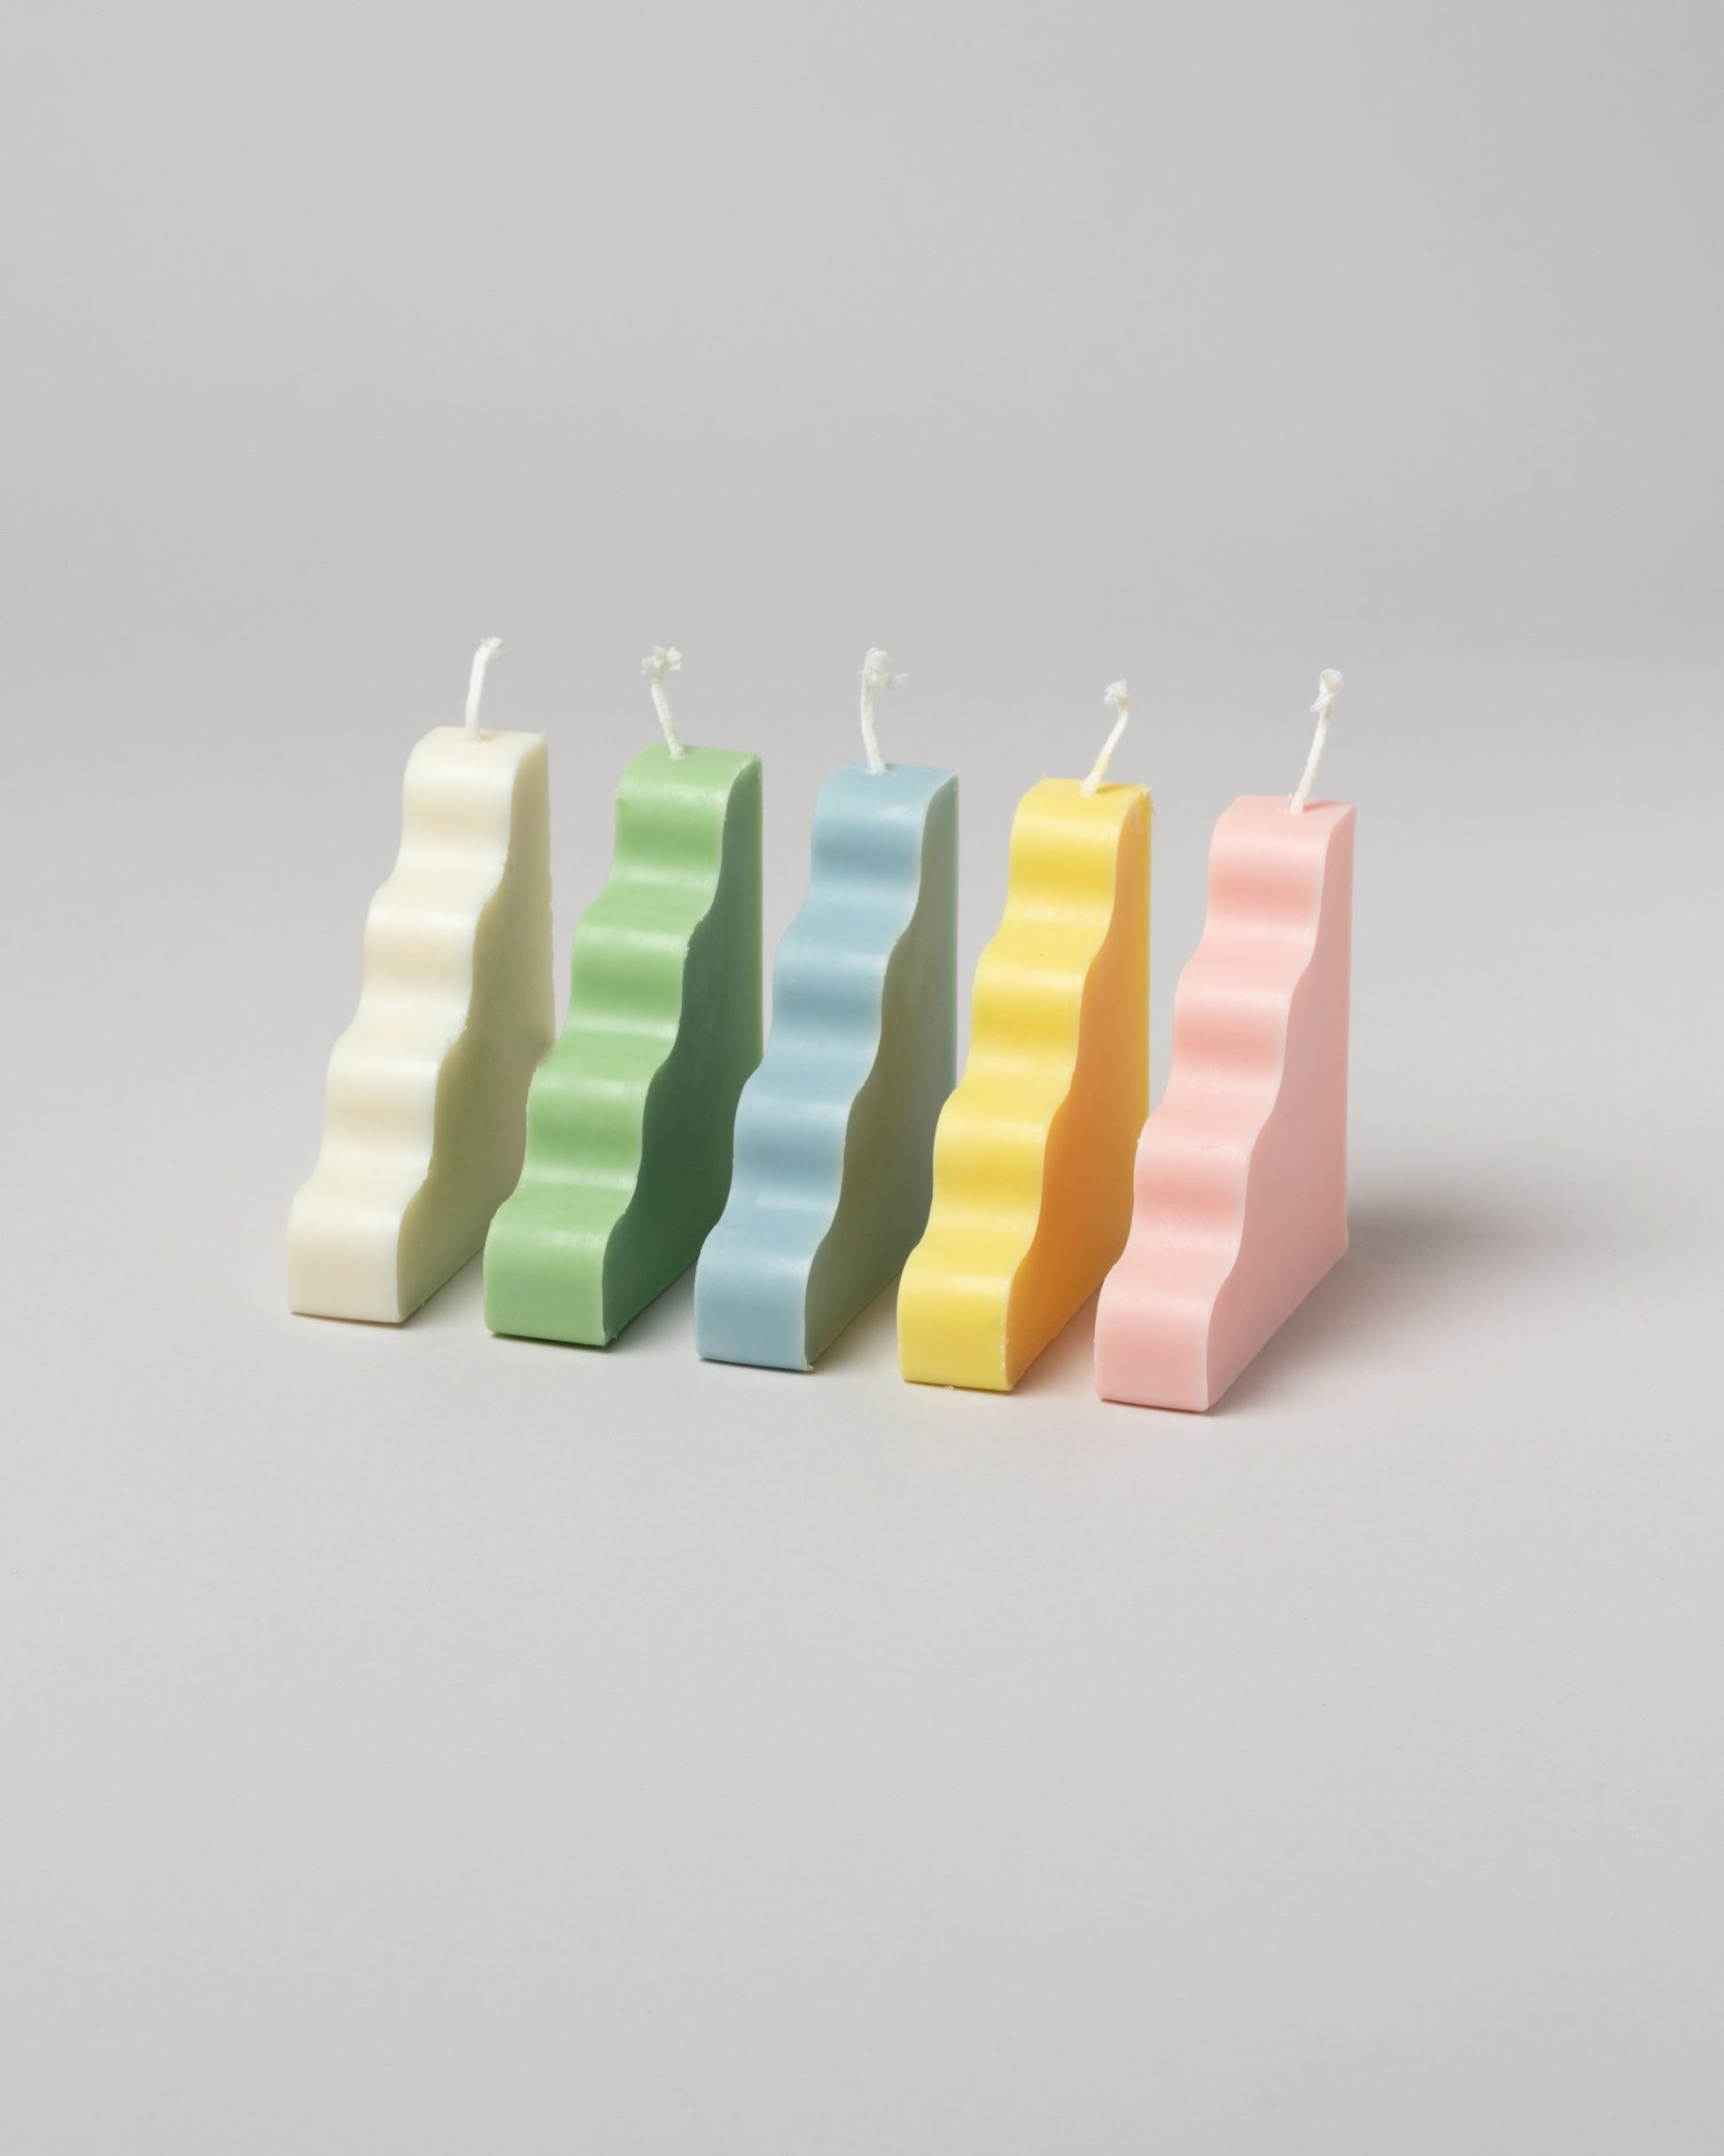  Group of SIG Step Candles on light color background.